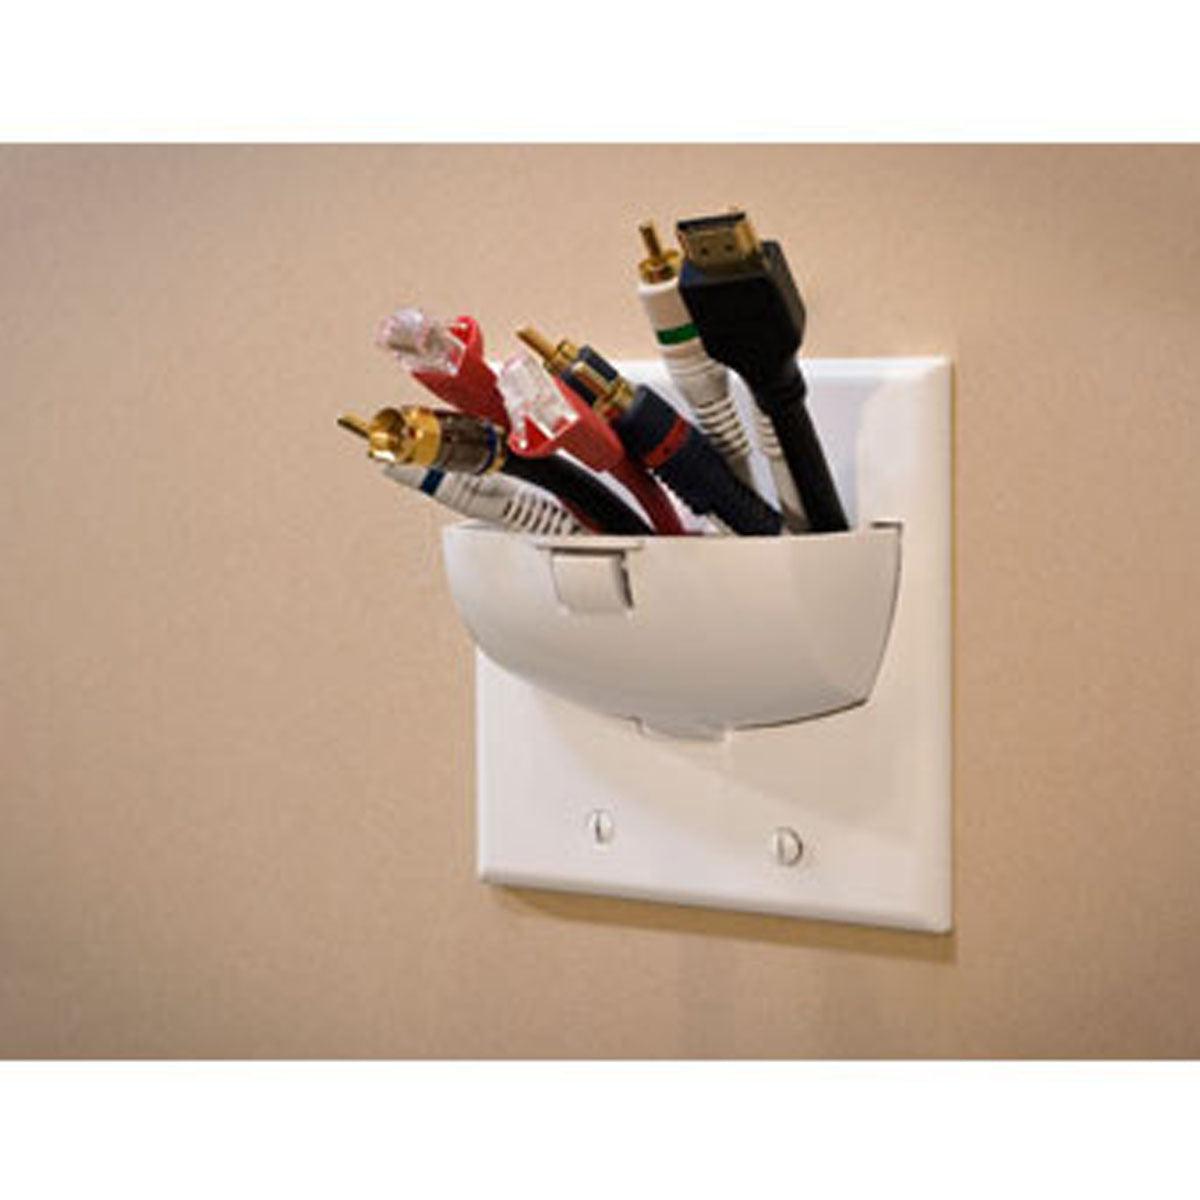 On-Q 2-Gang Hinged Bullnose Wall Plate White - Bees Lighting